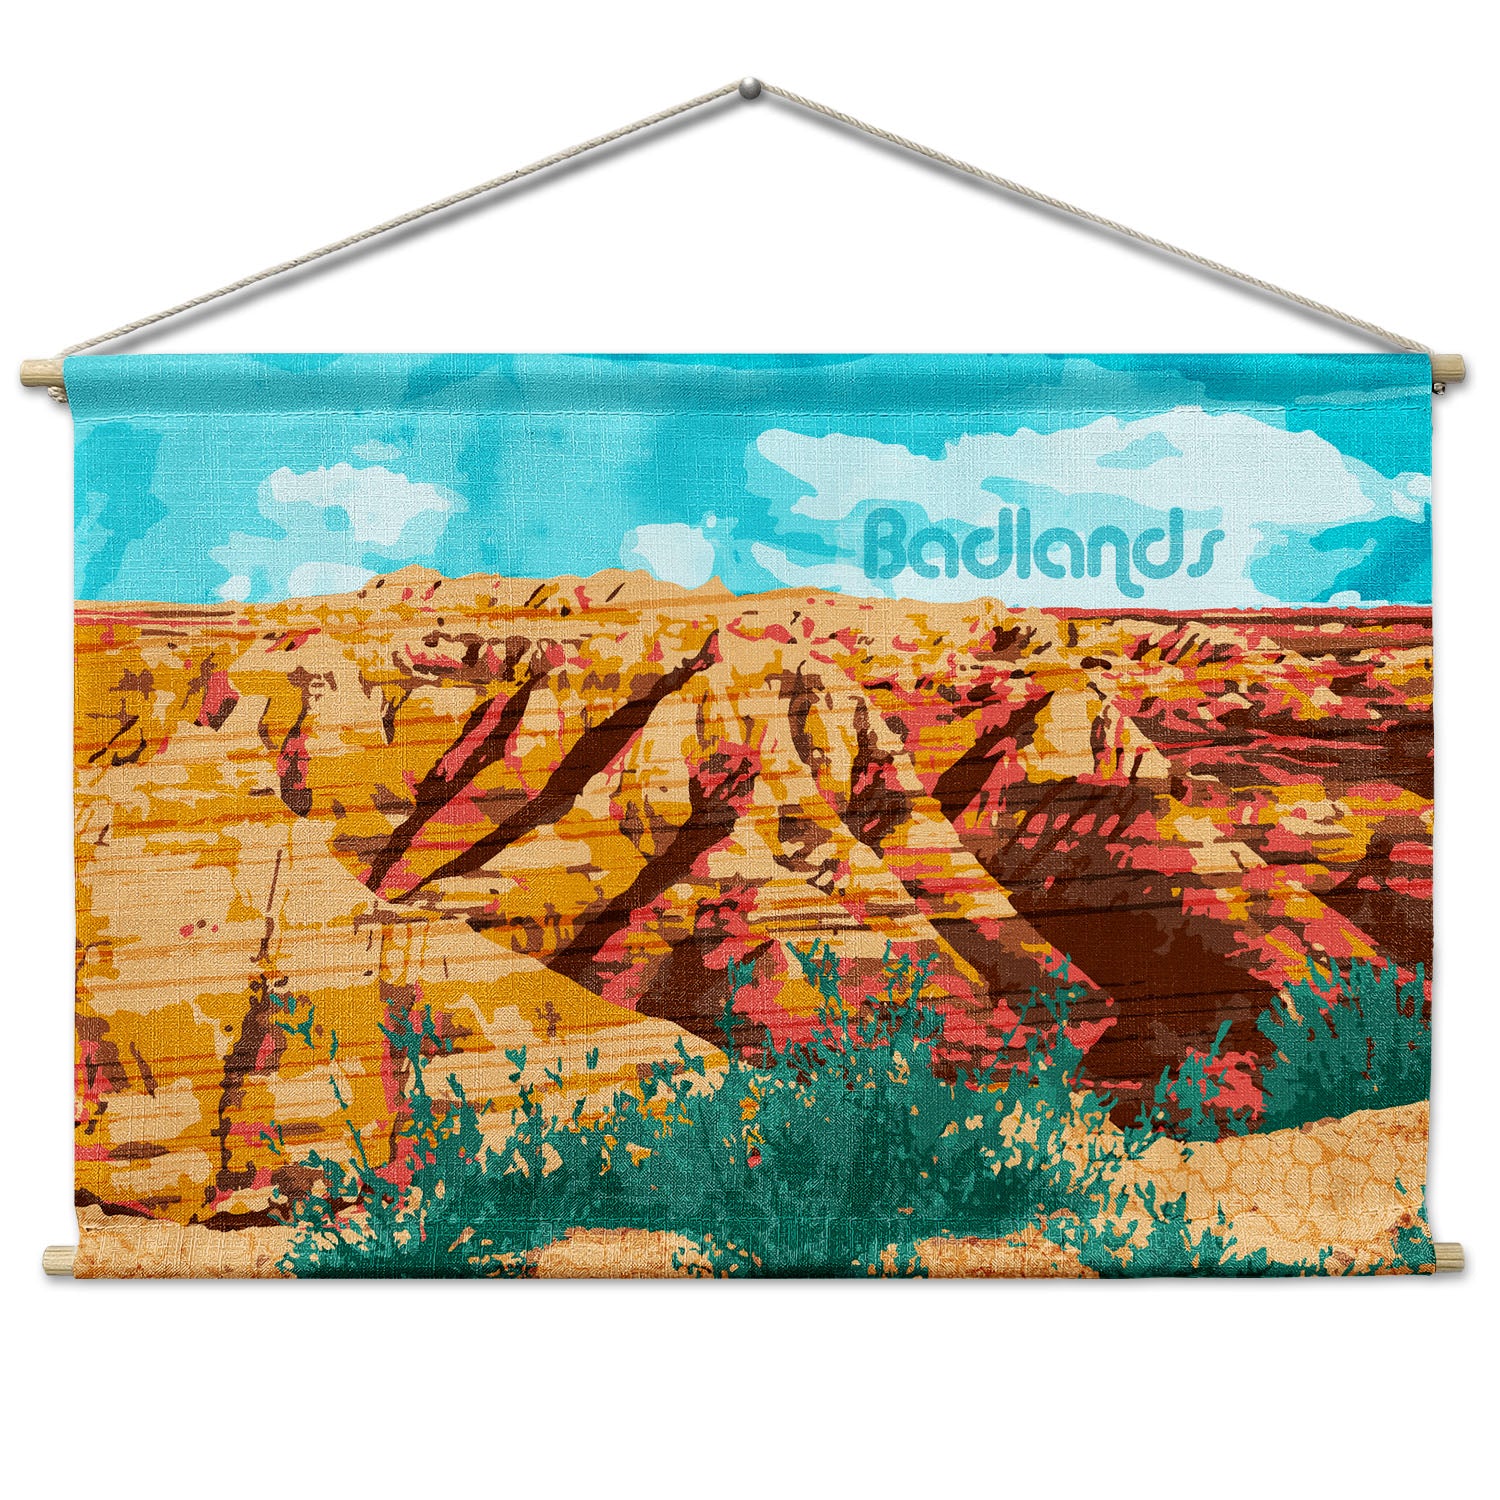 Badlands National Park Abstract Landscape Wall Hanging - Natural -  - Knotty Tie Co.